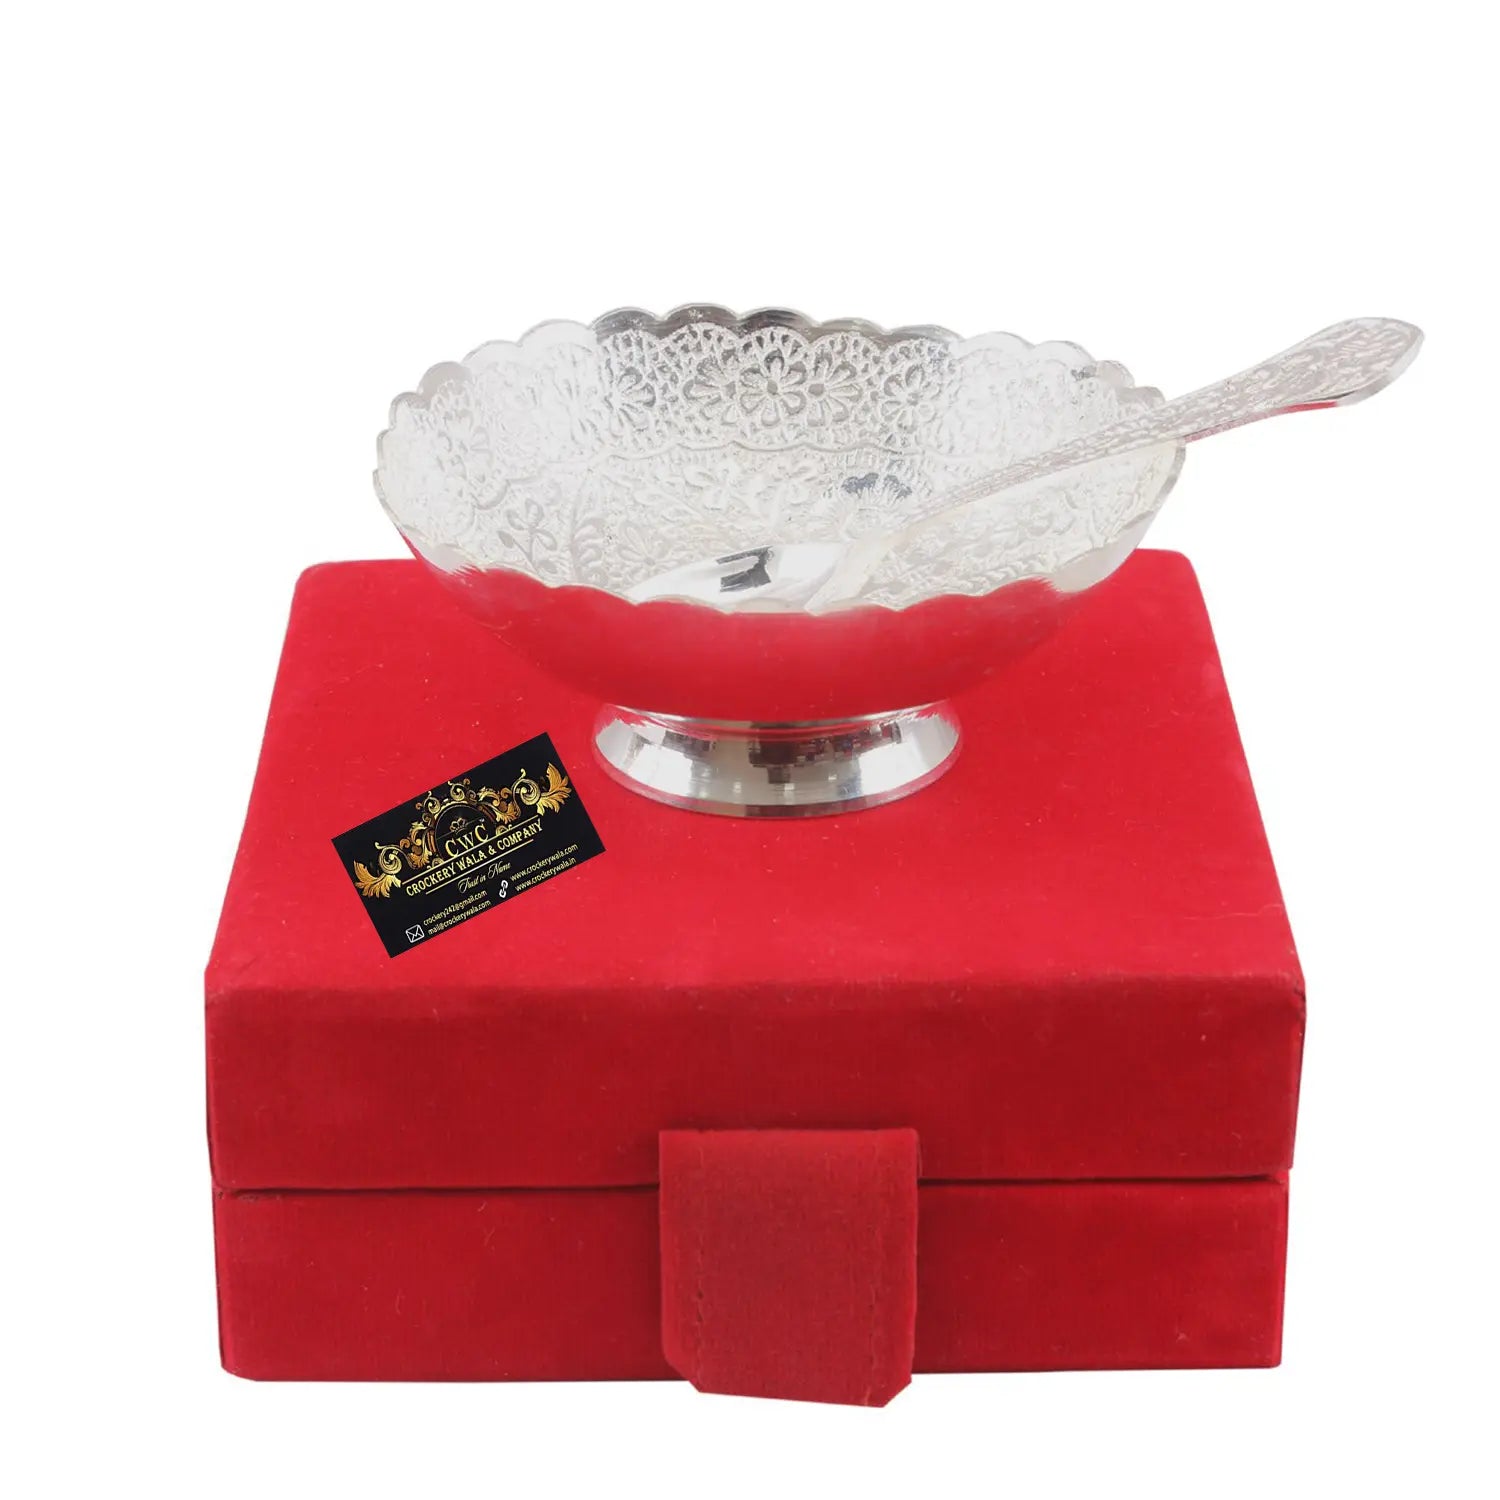 Crockery Wala And Company Silver Plated Designer Bowl with Spoon |150 ML| for Serving Dessert Home Hotel | Decorative Diwali Gift Item - CROCKERY WALA AND COMPANY 